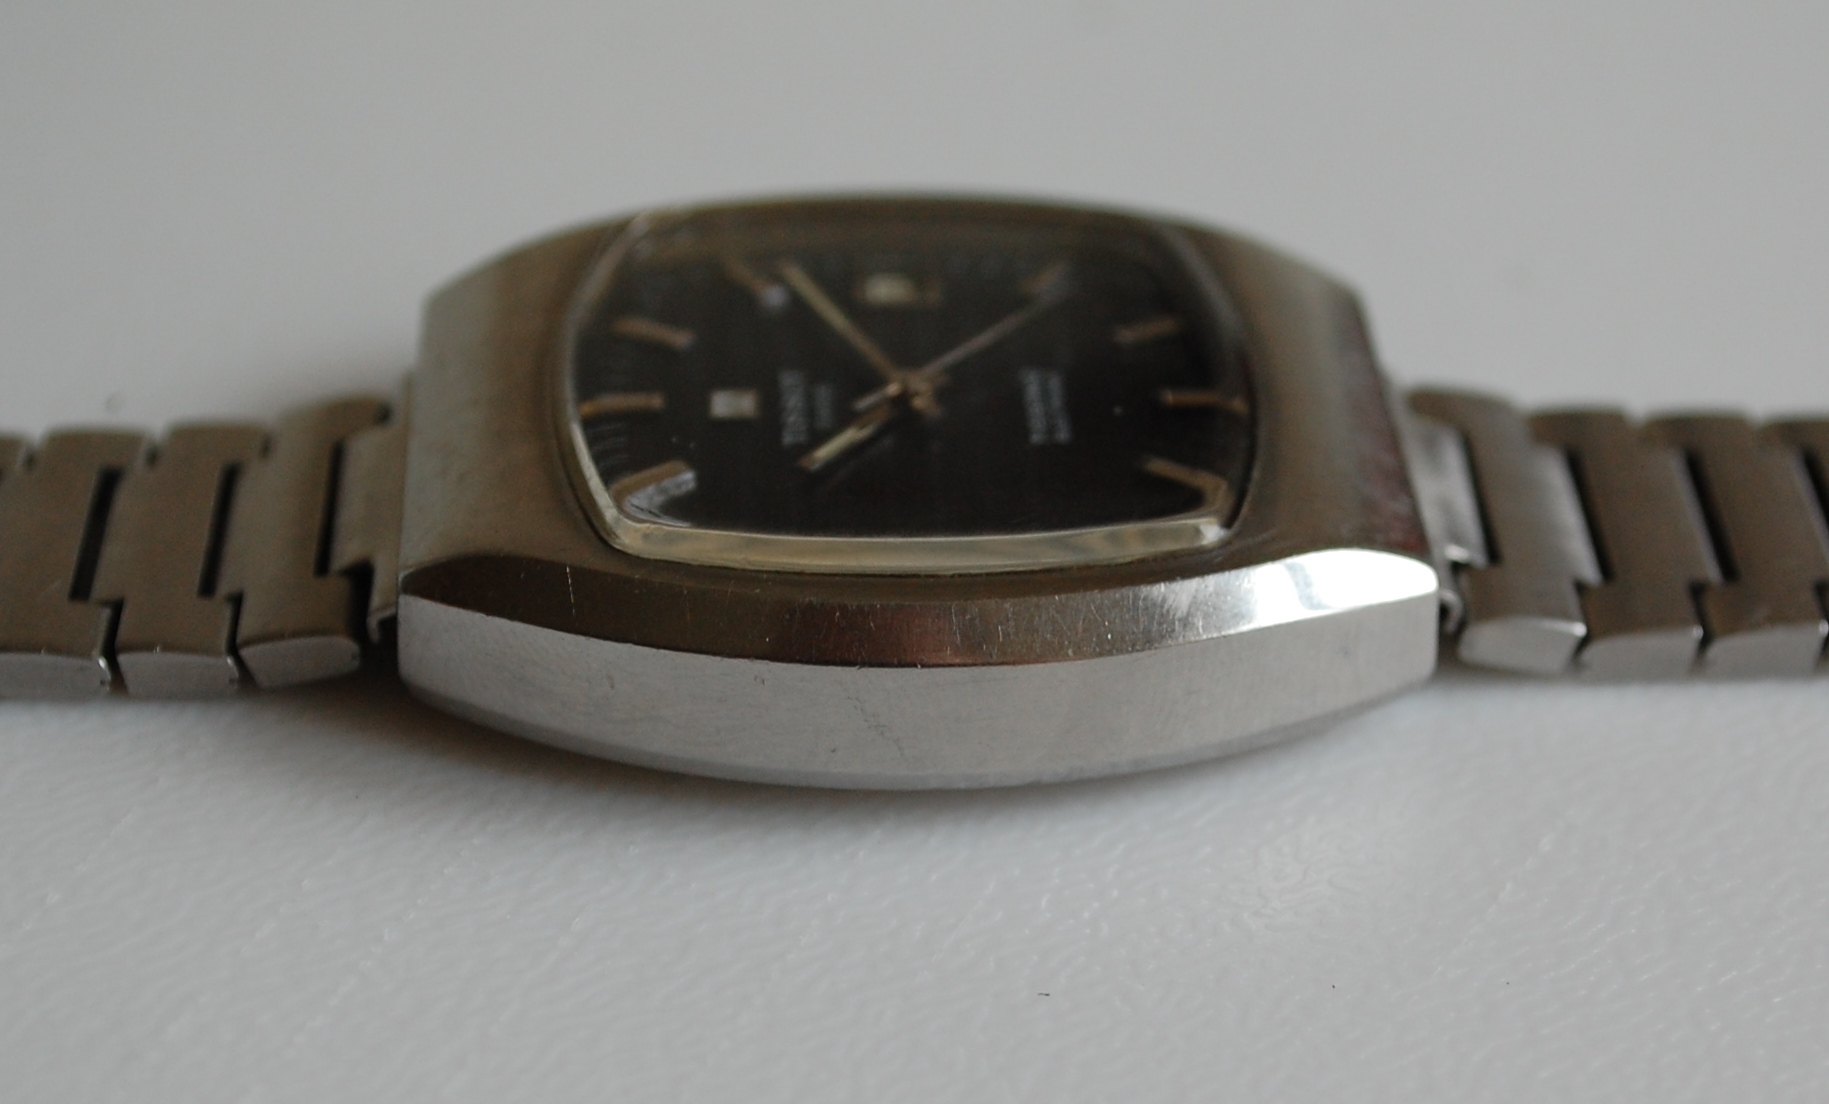 SOLD 1973 Tissot Tissonic electronic watch - Birth Year Watches